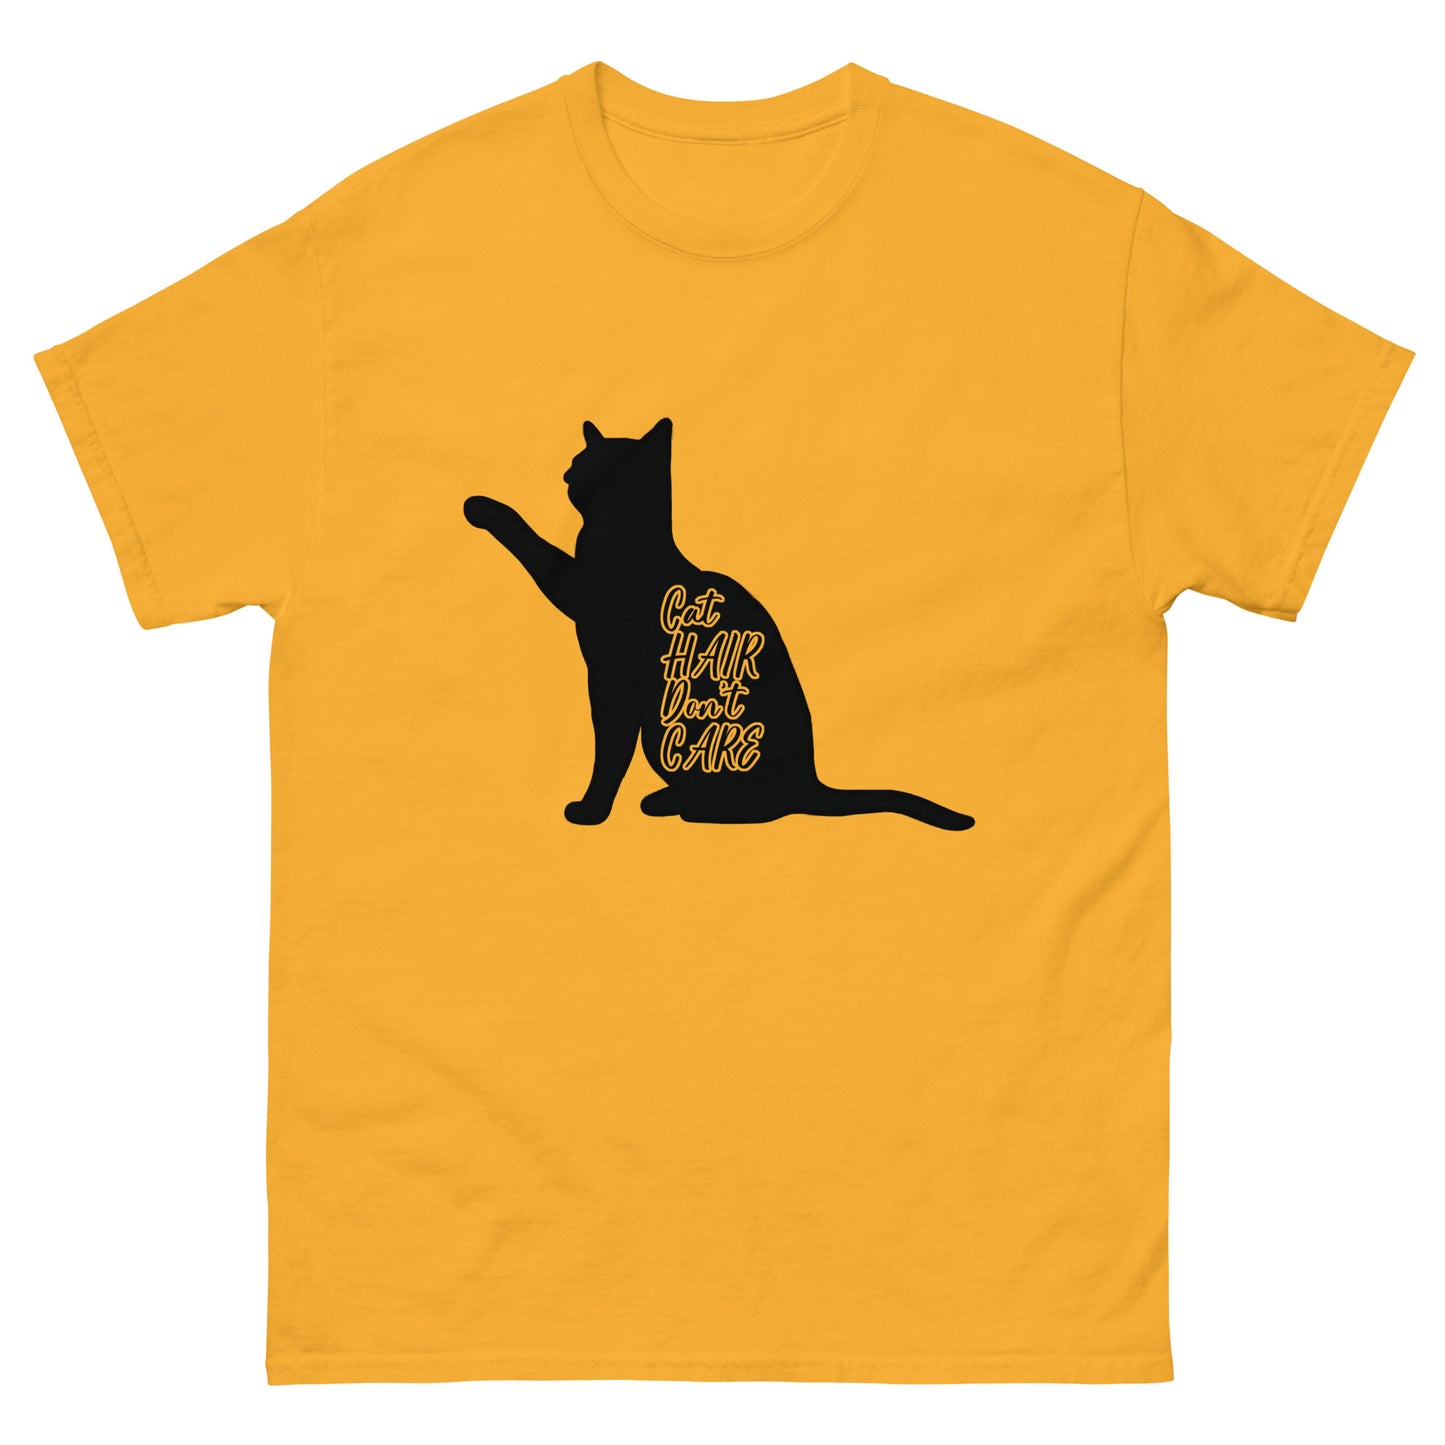 Cat hair don't care - classic tee